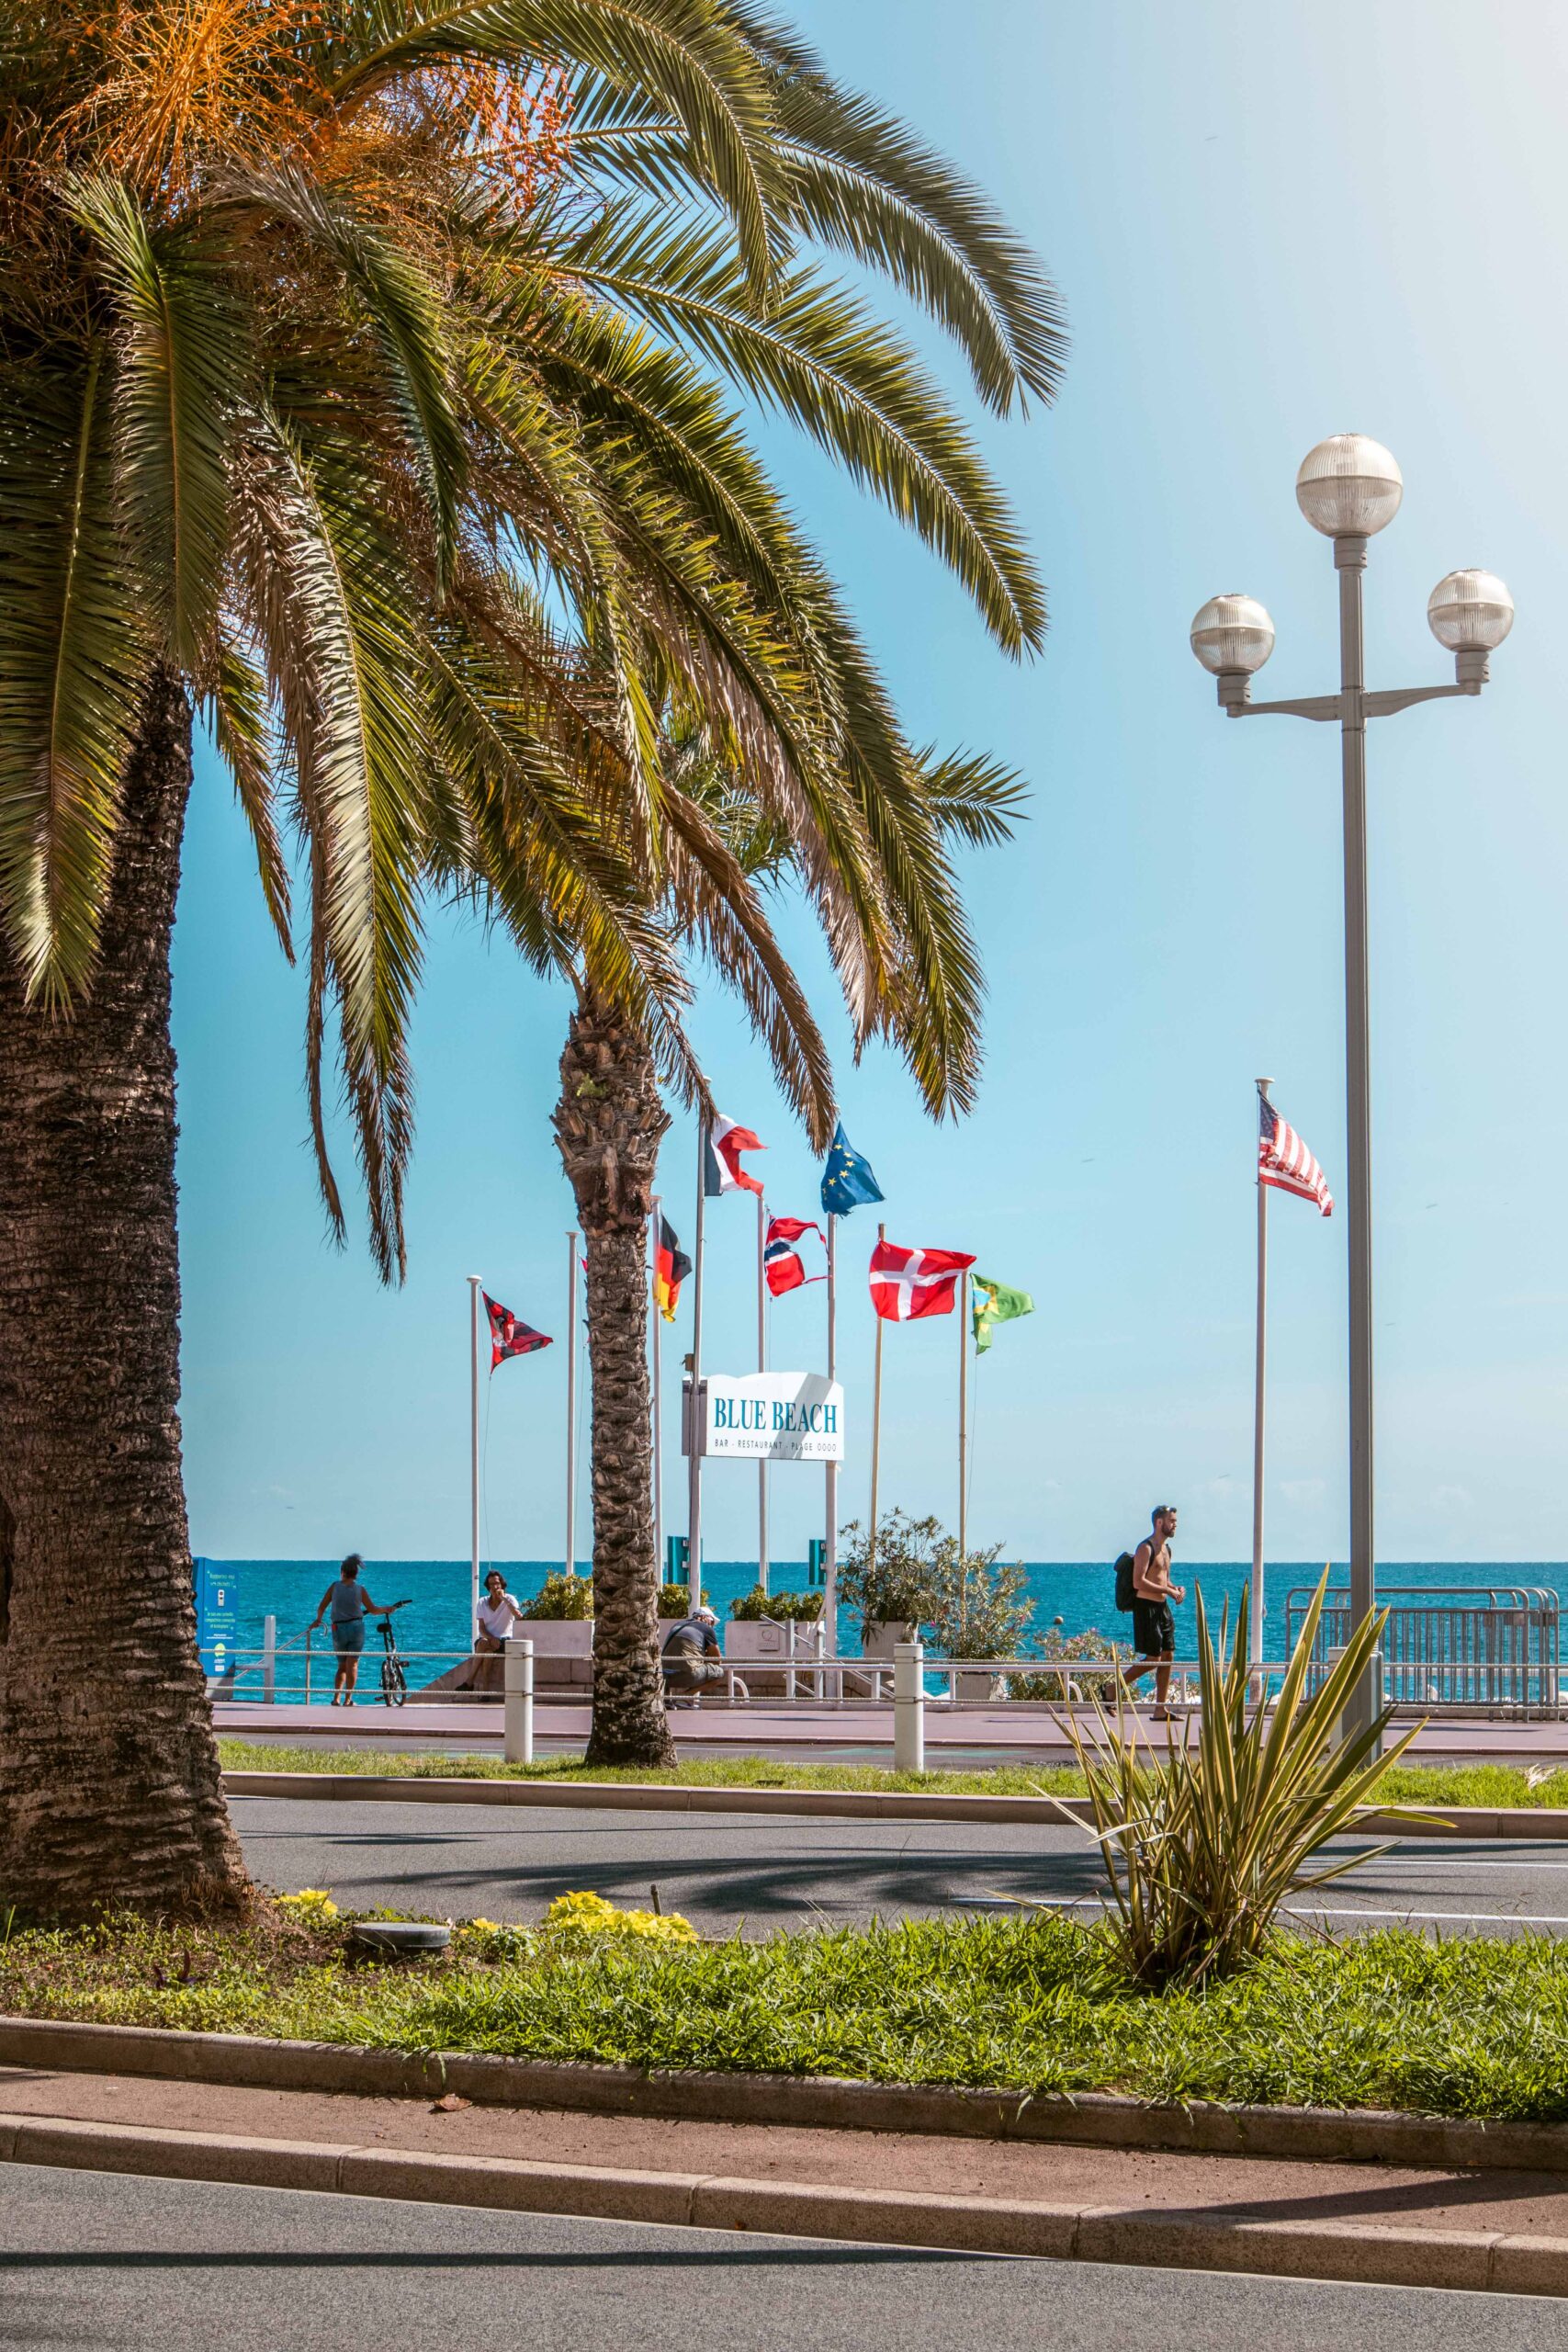 Palmtrees, road and the entrance of the Blue Beach on the Promenade des Anglais in Nice, France